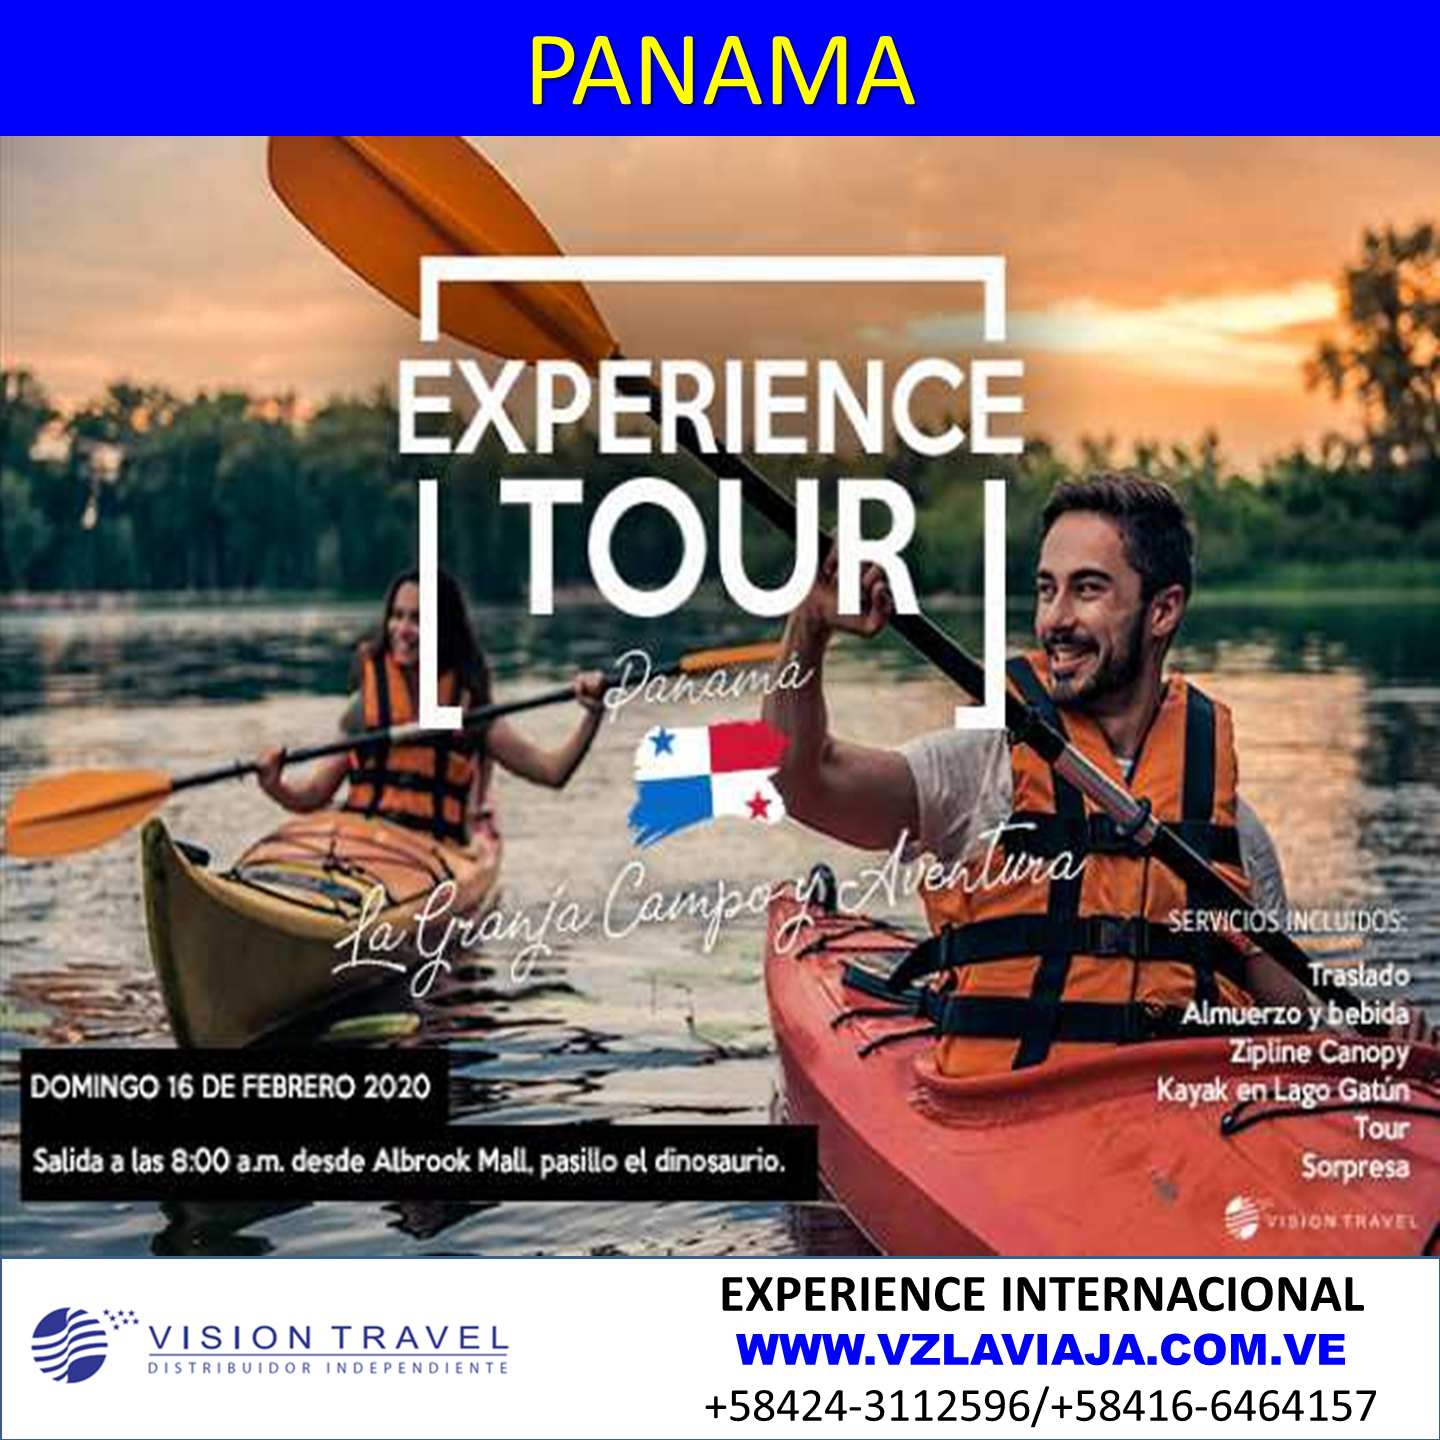 Plan Full Day Experience Tour Panamá USD